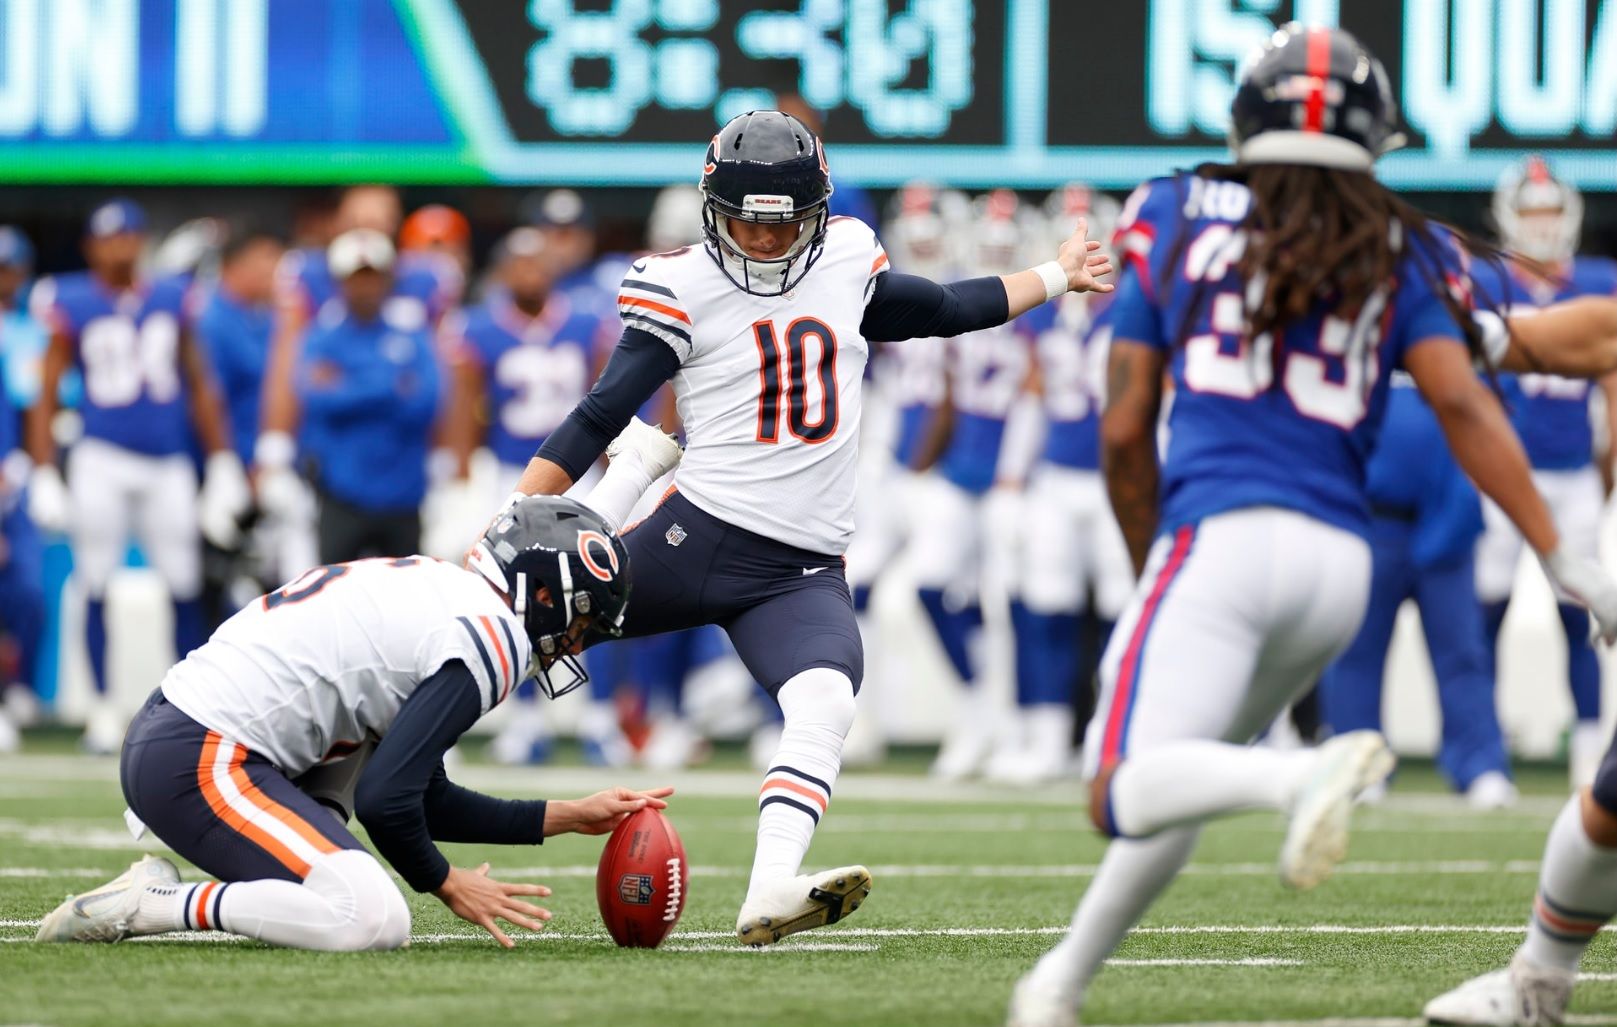 Newly signed kicker Badgley has all points for Bears in 20-12 loss to Giants